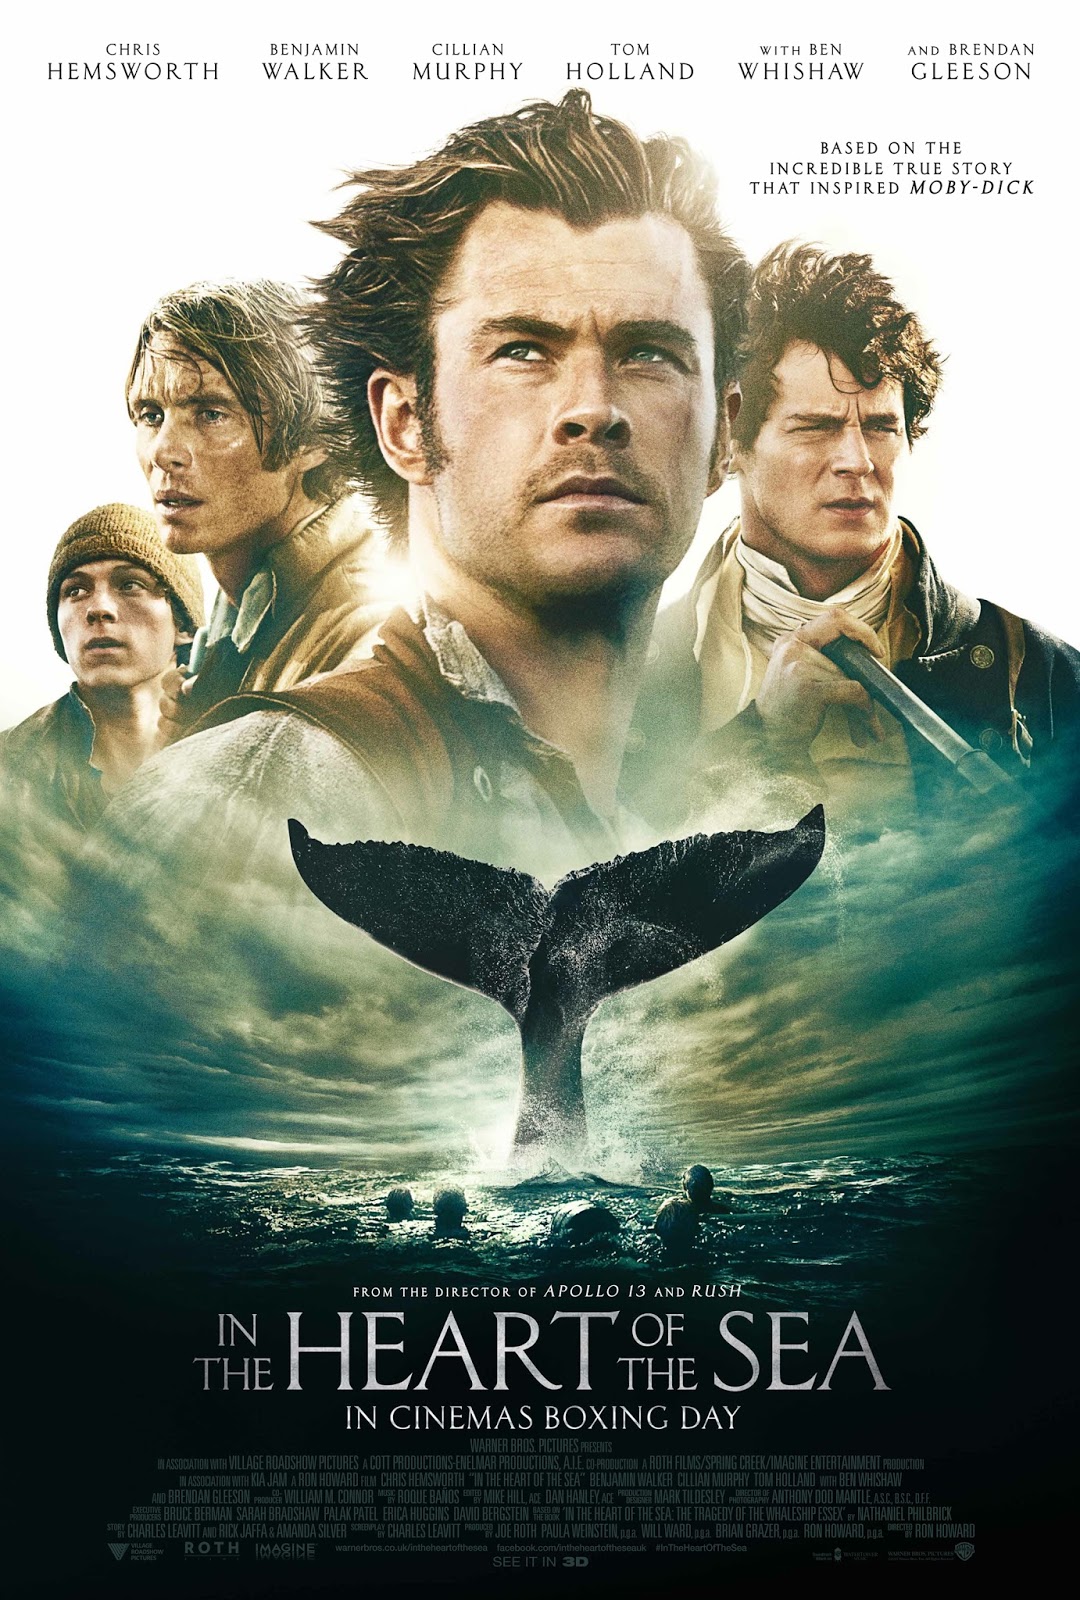 Poster of In The Heart of The Sea showing the faces of Chris Hemsworth, Benjamin Walker, Cillian Murphy, and Tom Holland, above an of shipwrecked men in the sea with a huge whale's tail hovering above them, waiting to strike